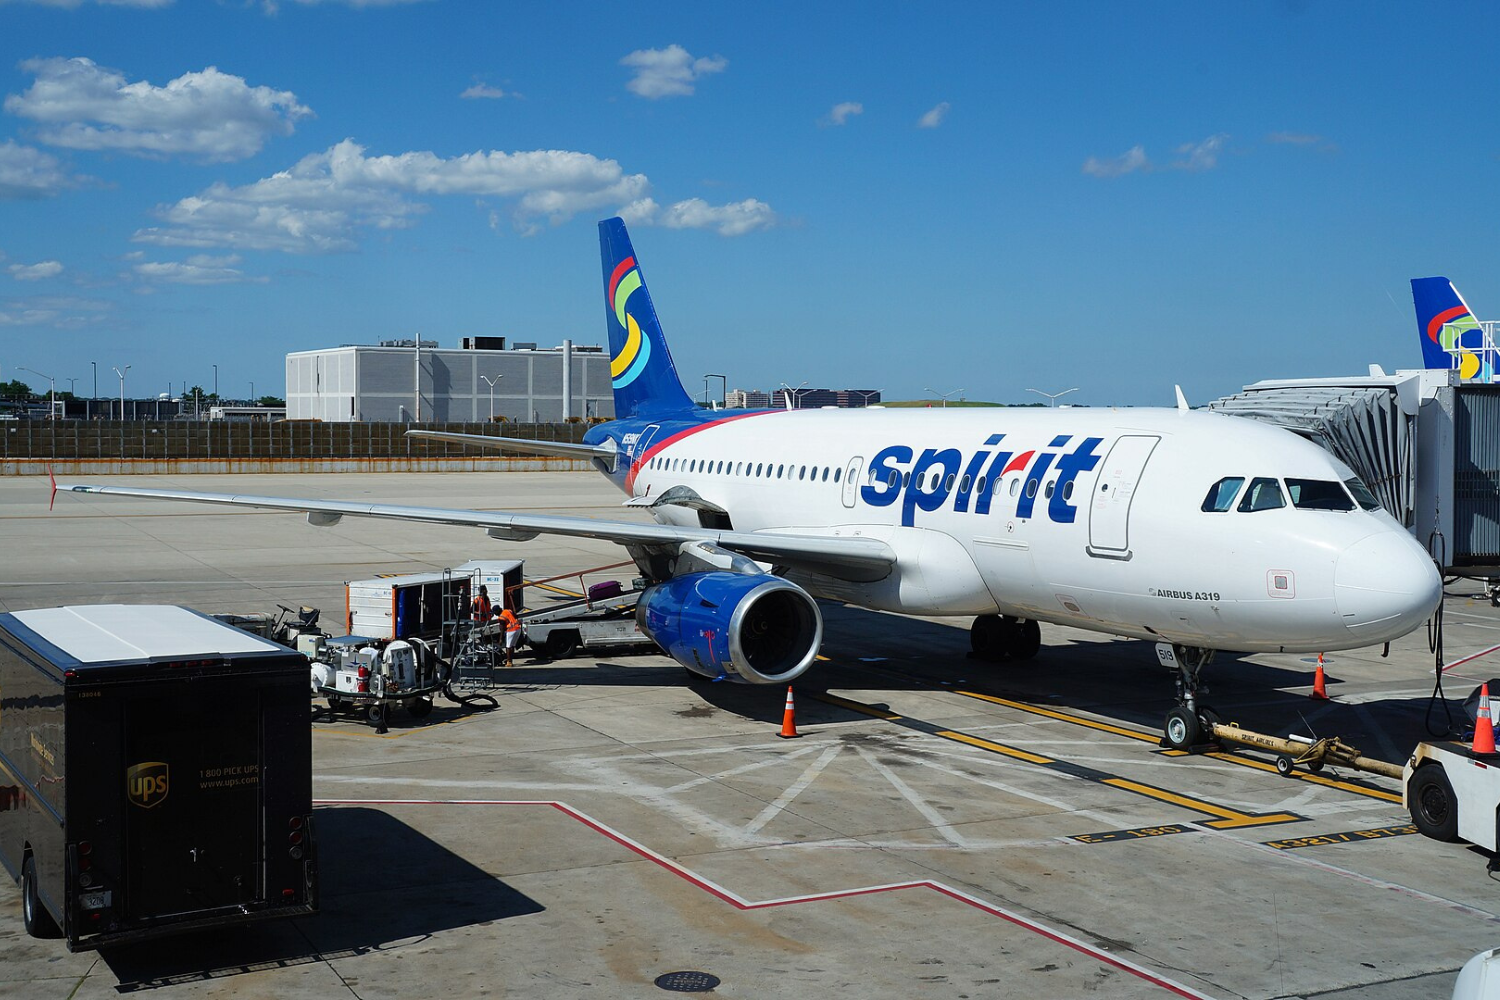 white spirit airlines flight at the airport